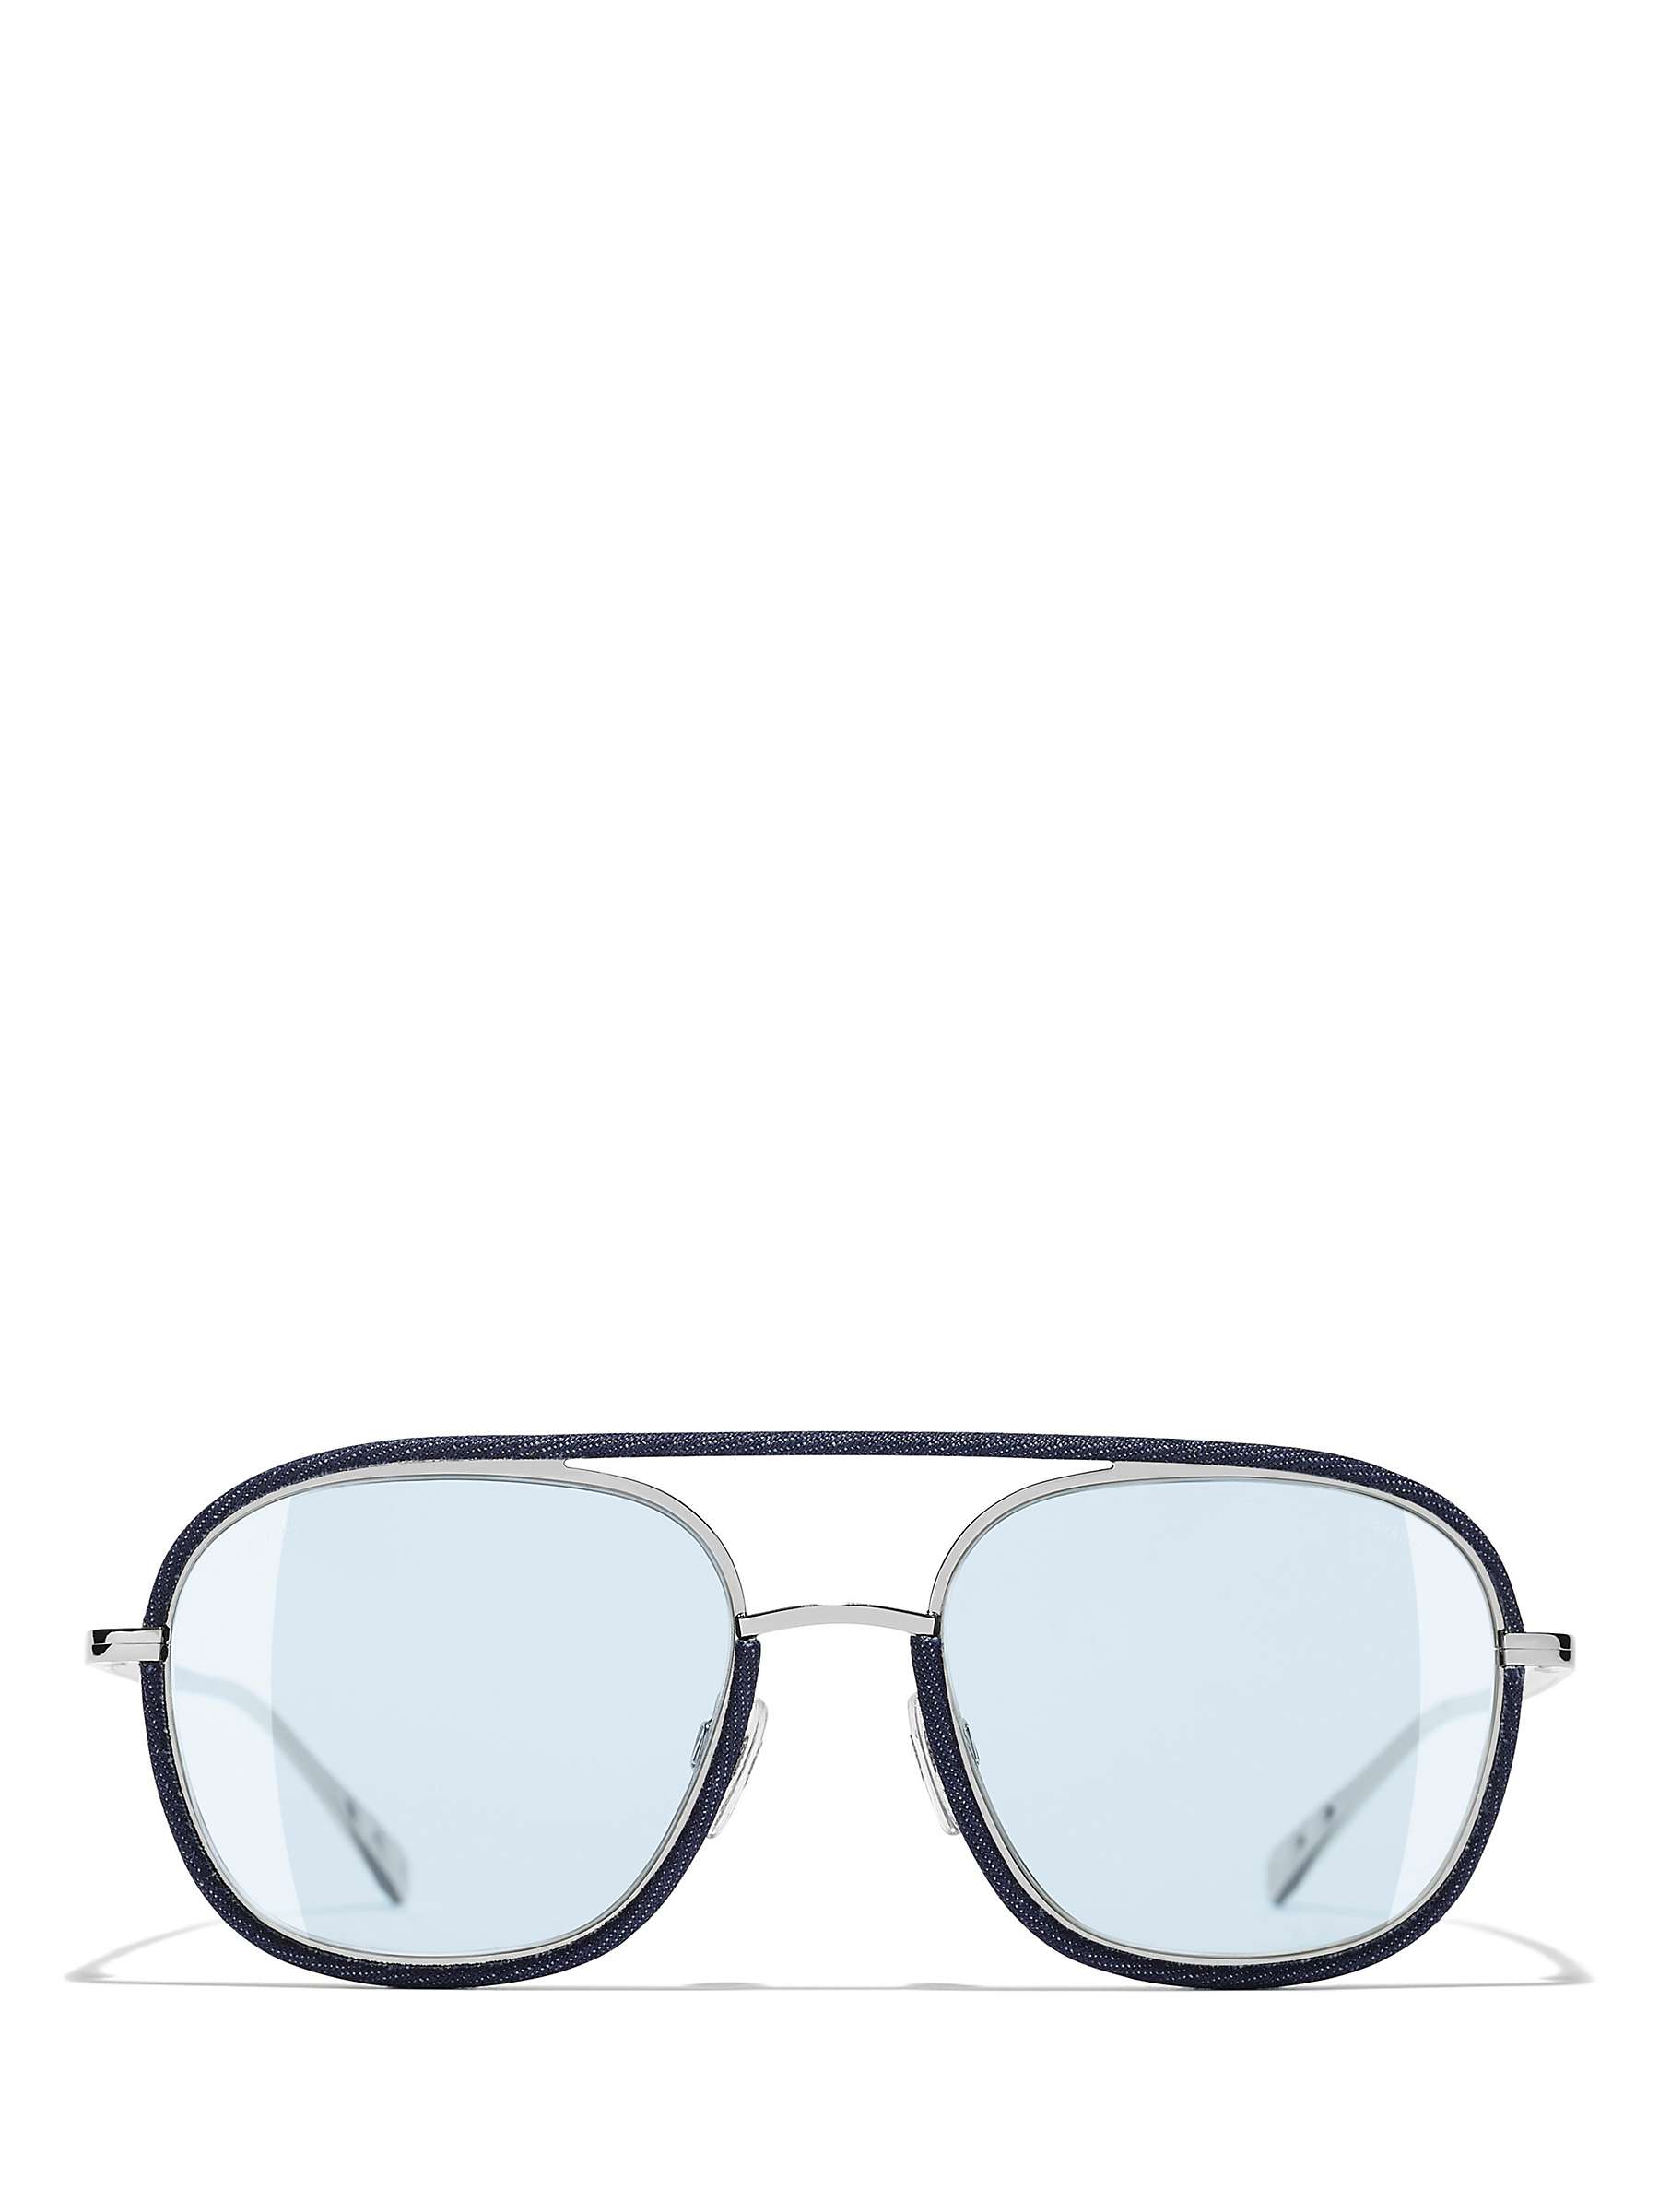 Buy CHANEL Oval Sunglasses CH4249J Silver/Light Blue Online at johnlewis.com